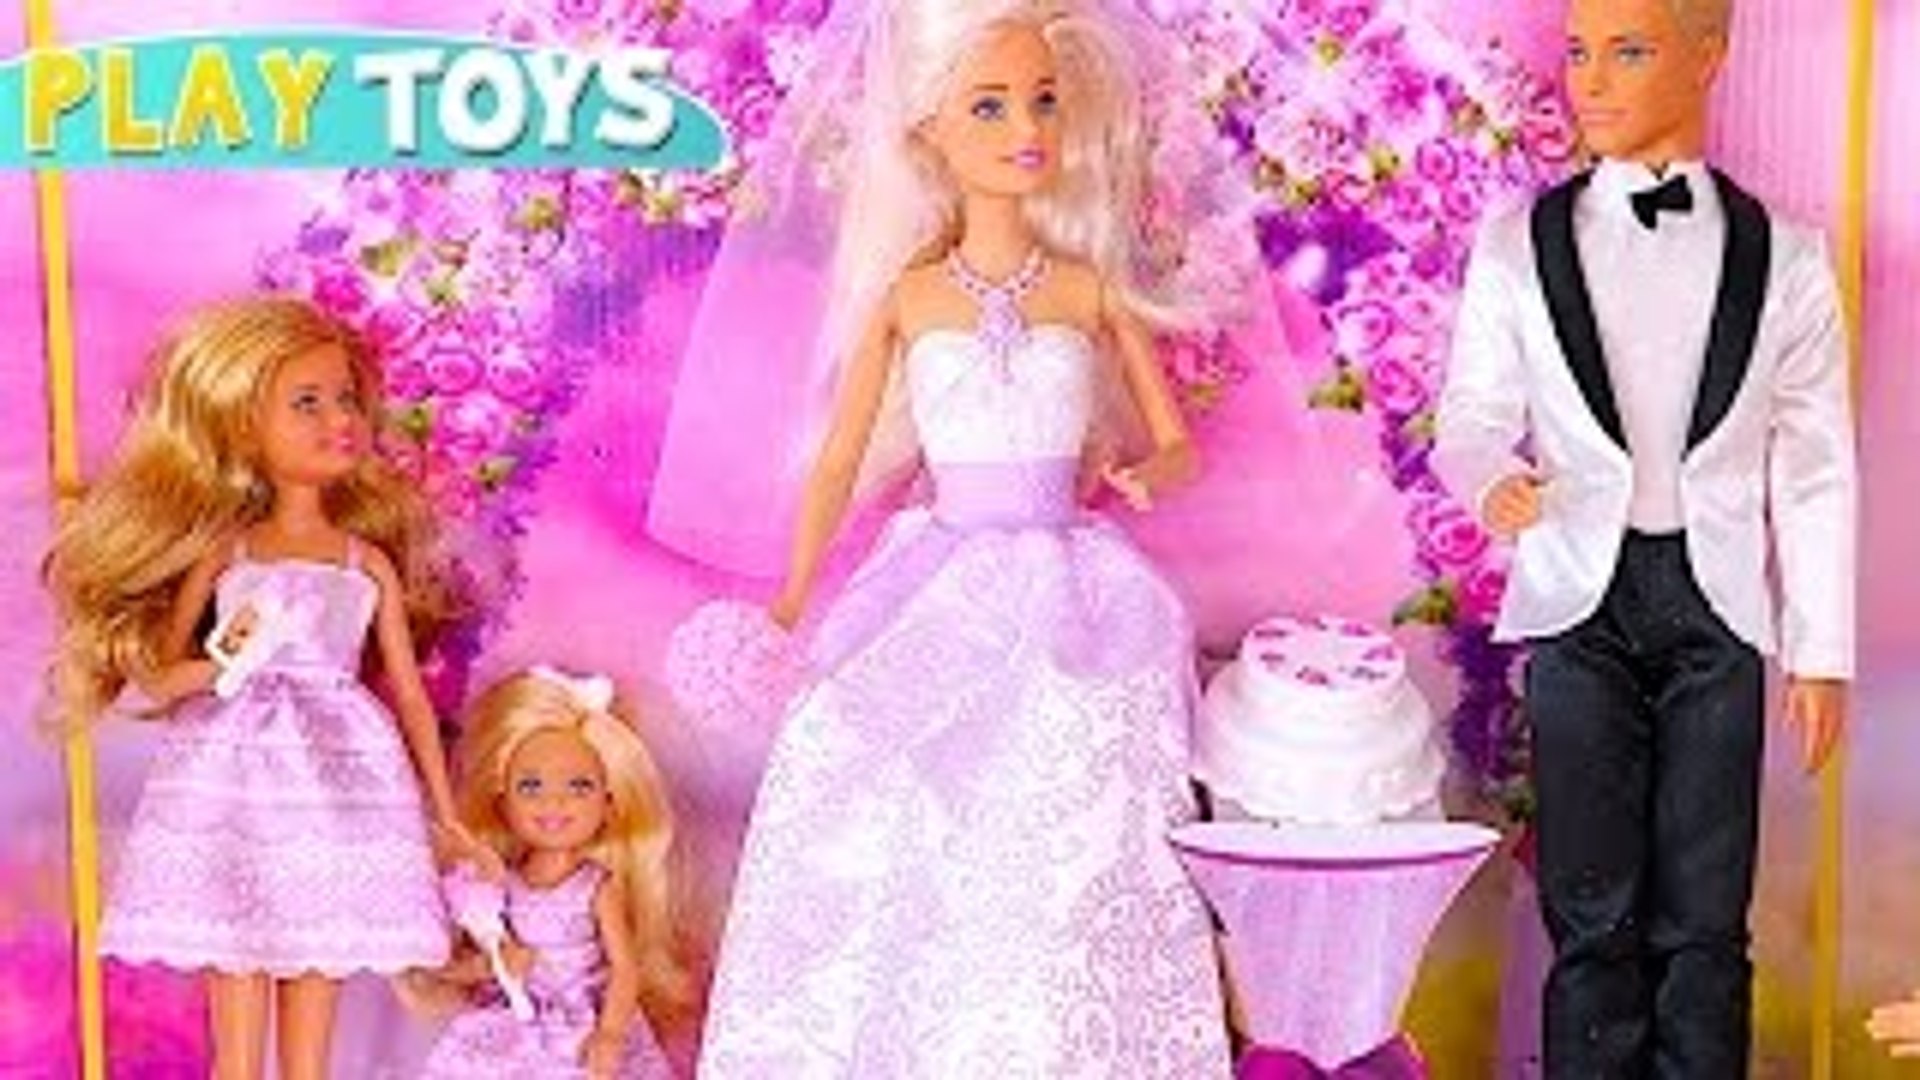 Barbie and Ken Wedding day! - Baby doll pink car toy & bicycle play toys  kids - Dailymotion Video